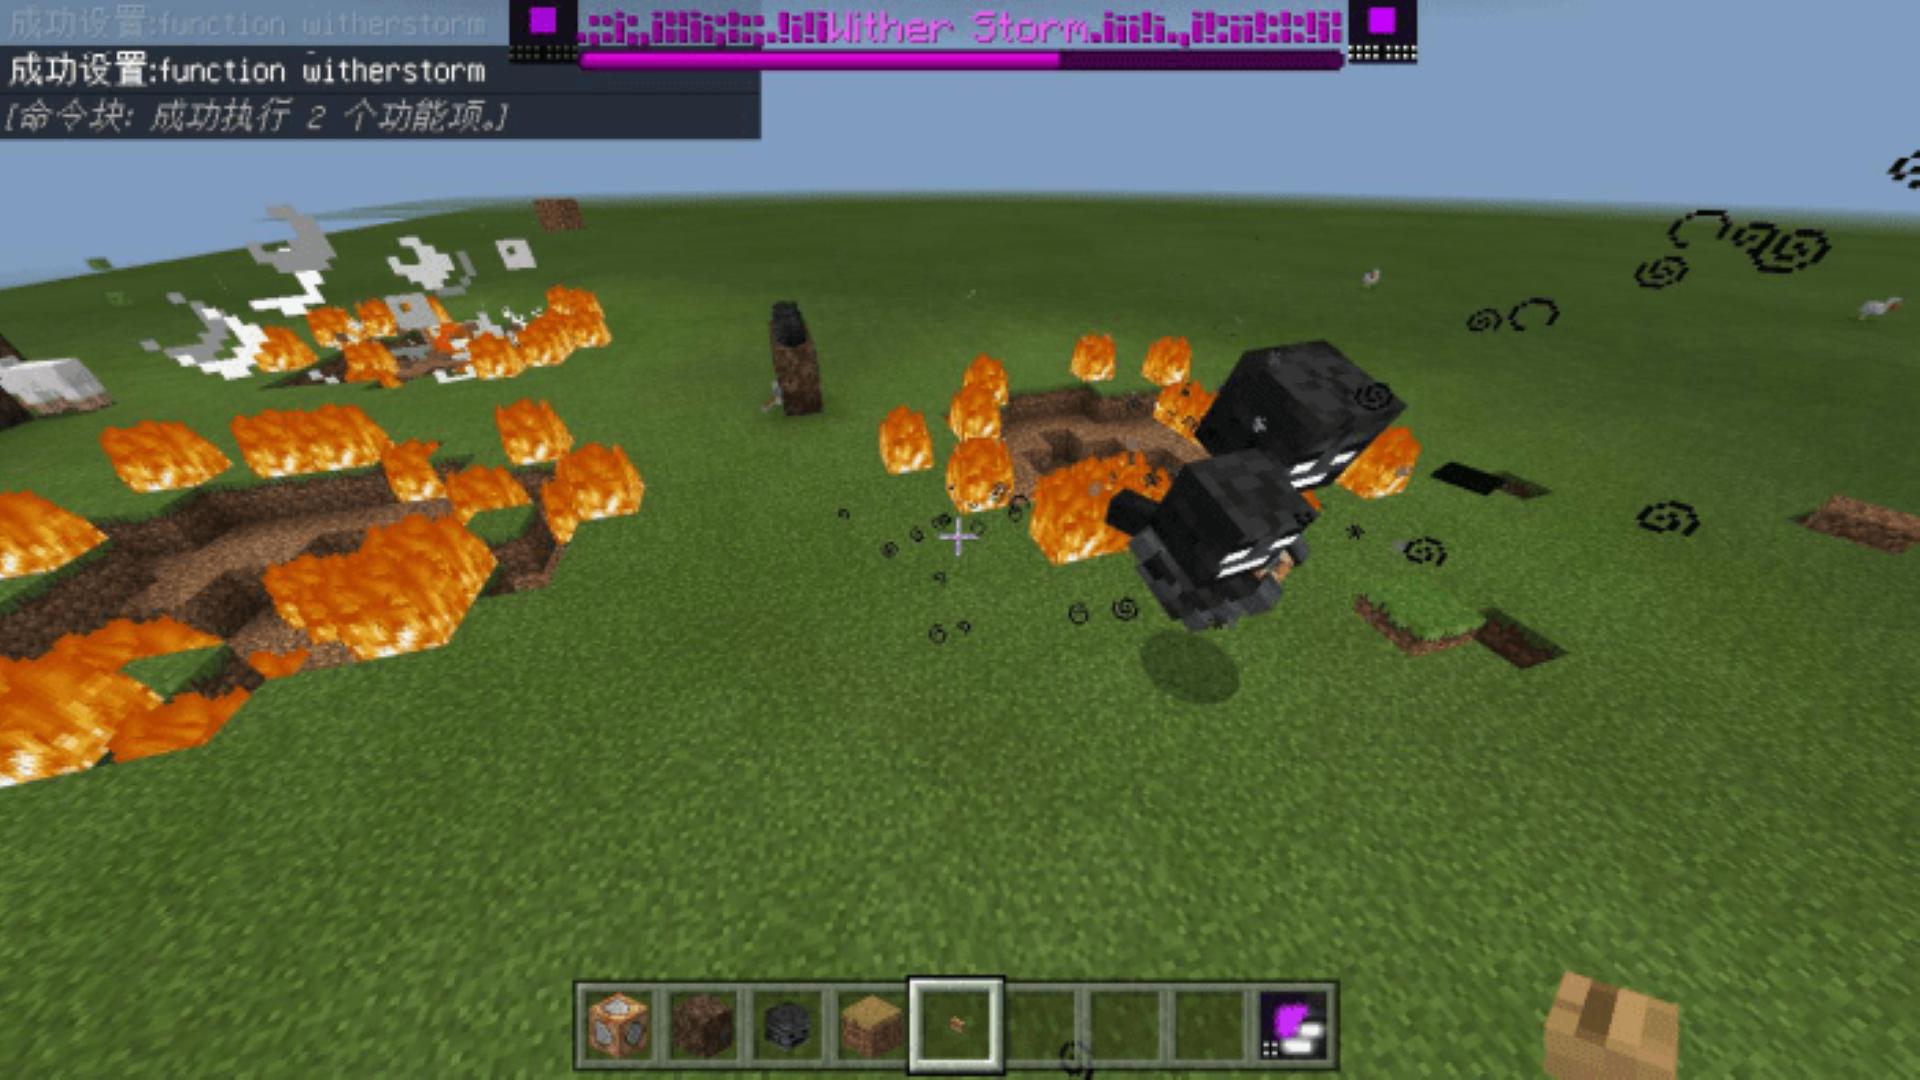 Wither Storm mod for MCPE - Apps on Google Play